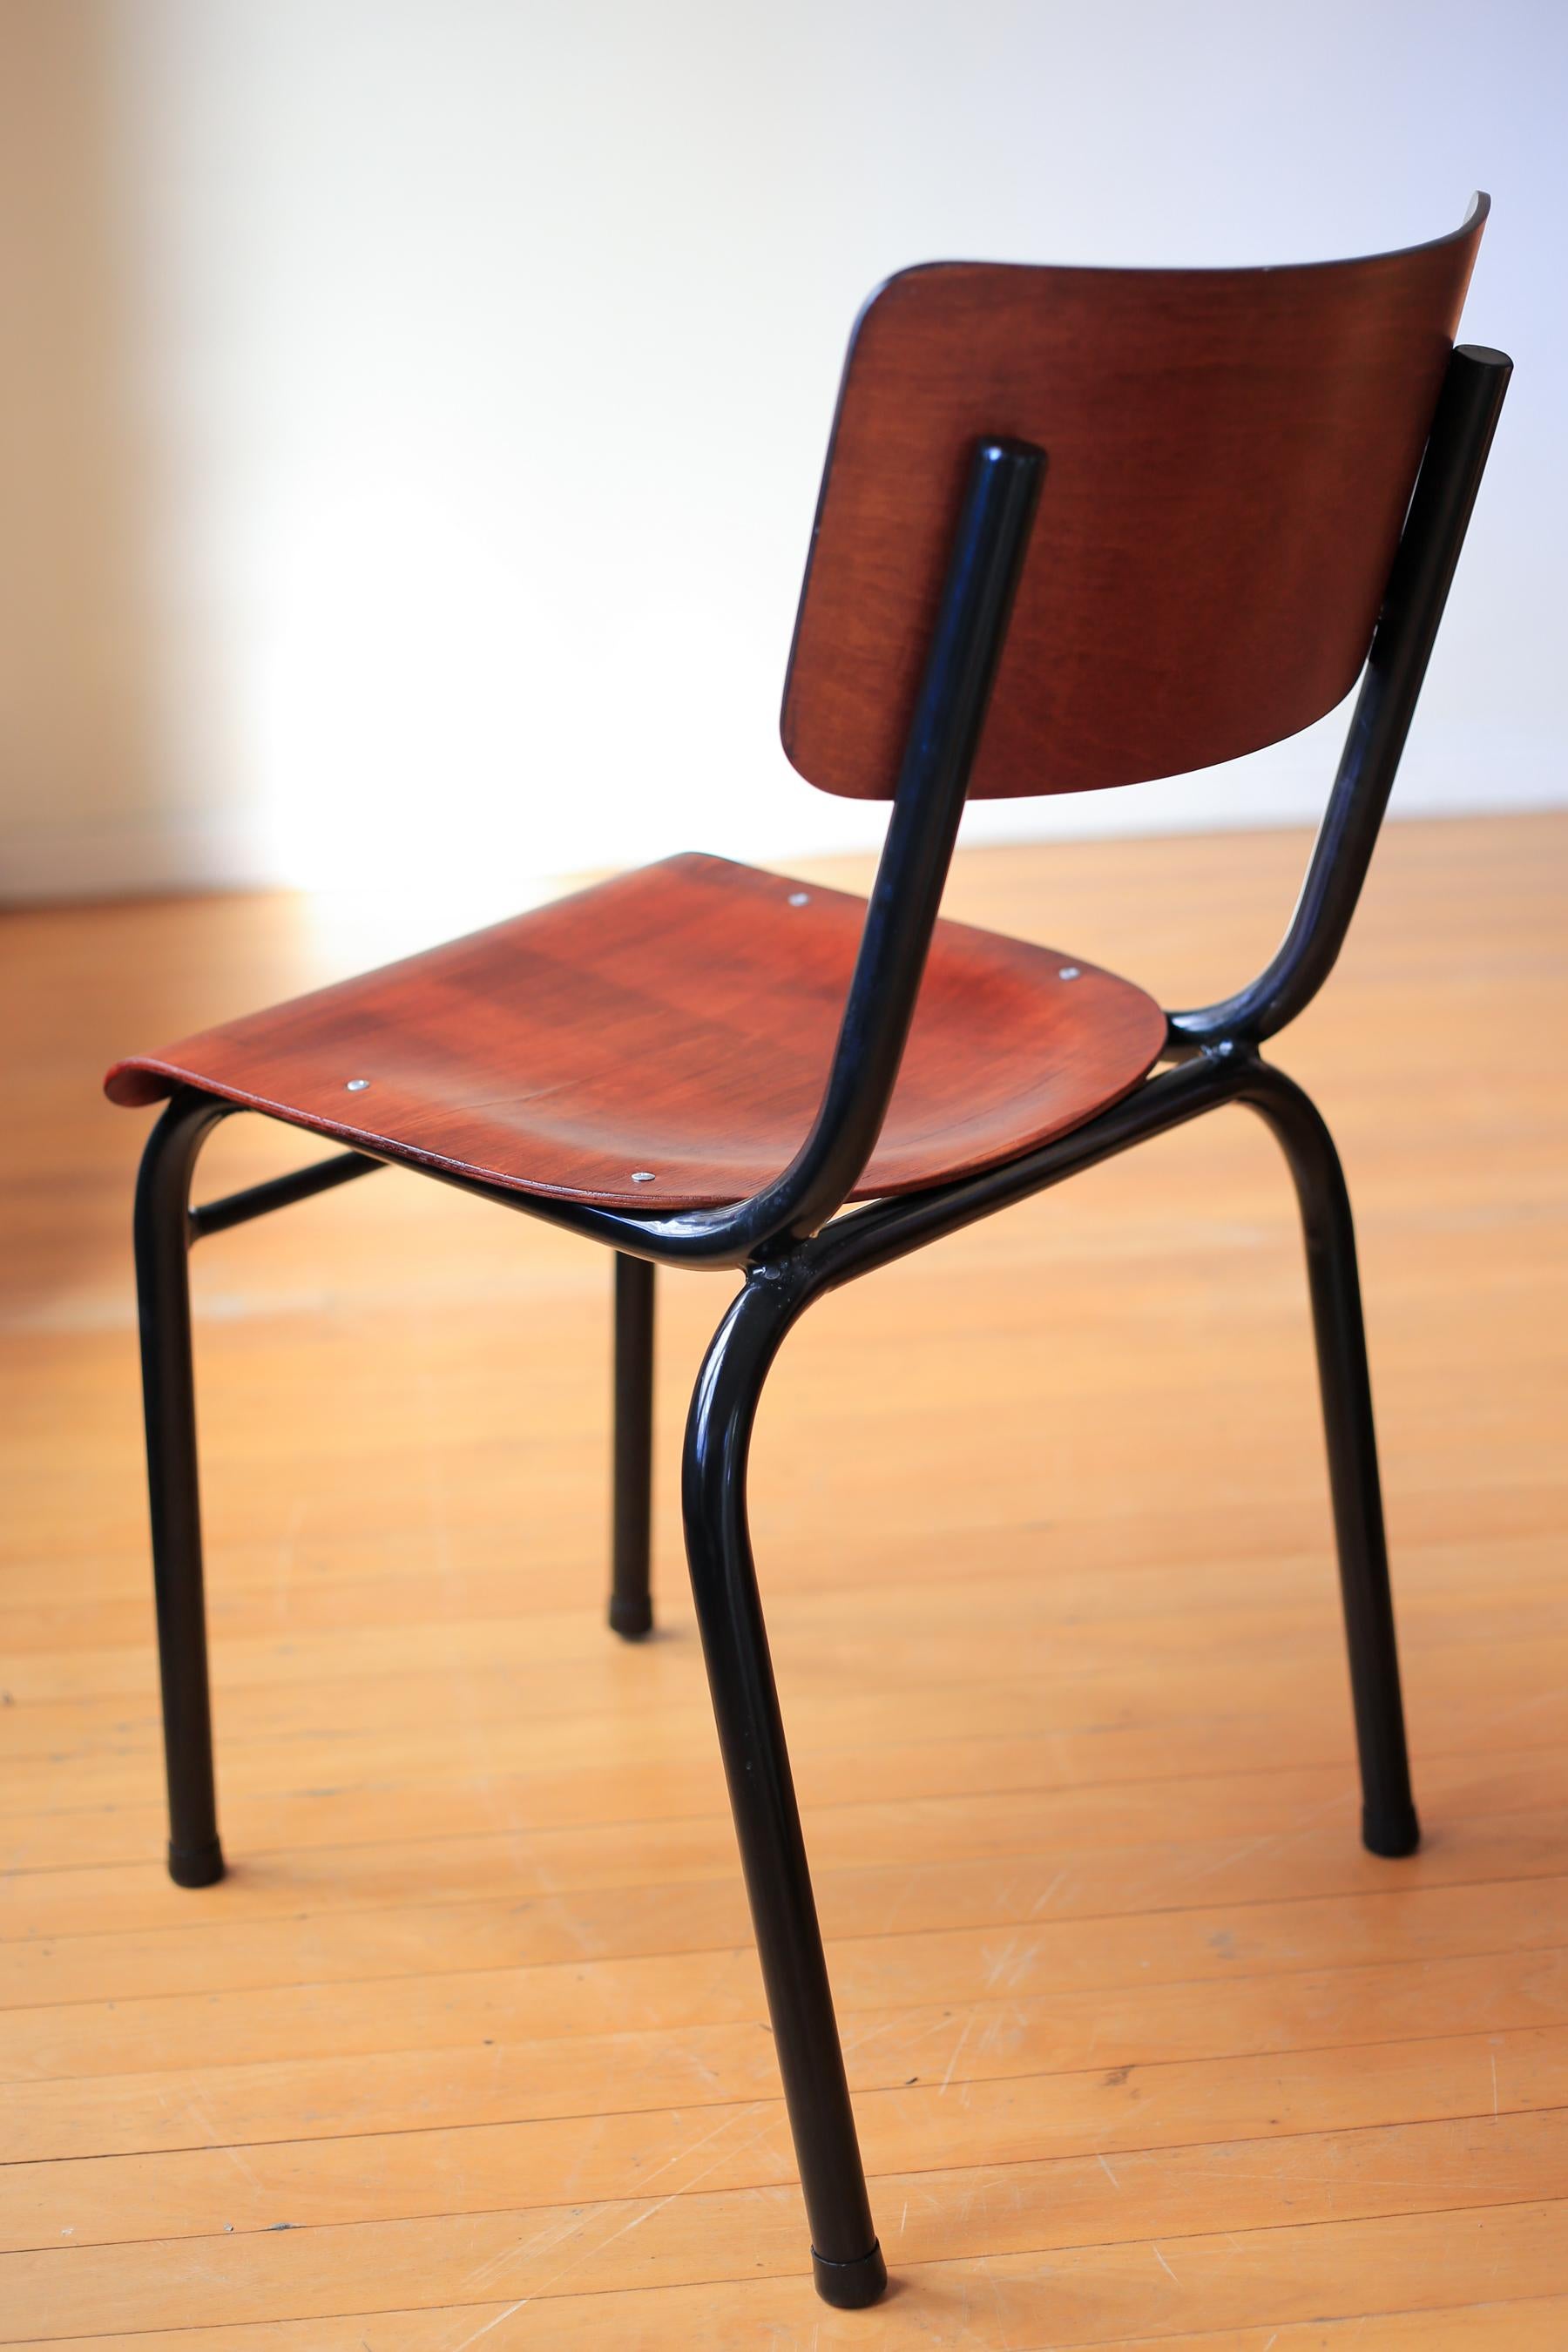 These refurbished chairs are 1940s school hall chair from South Africa. The frames have been sandblasted and powder coated to a glossy black and the molded plywood seats and backs have been stripped, sanded and spray coated. The seats and outside